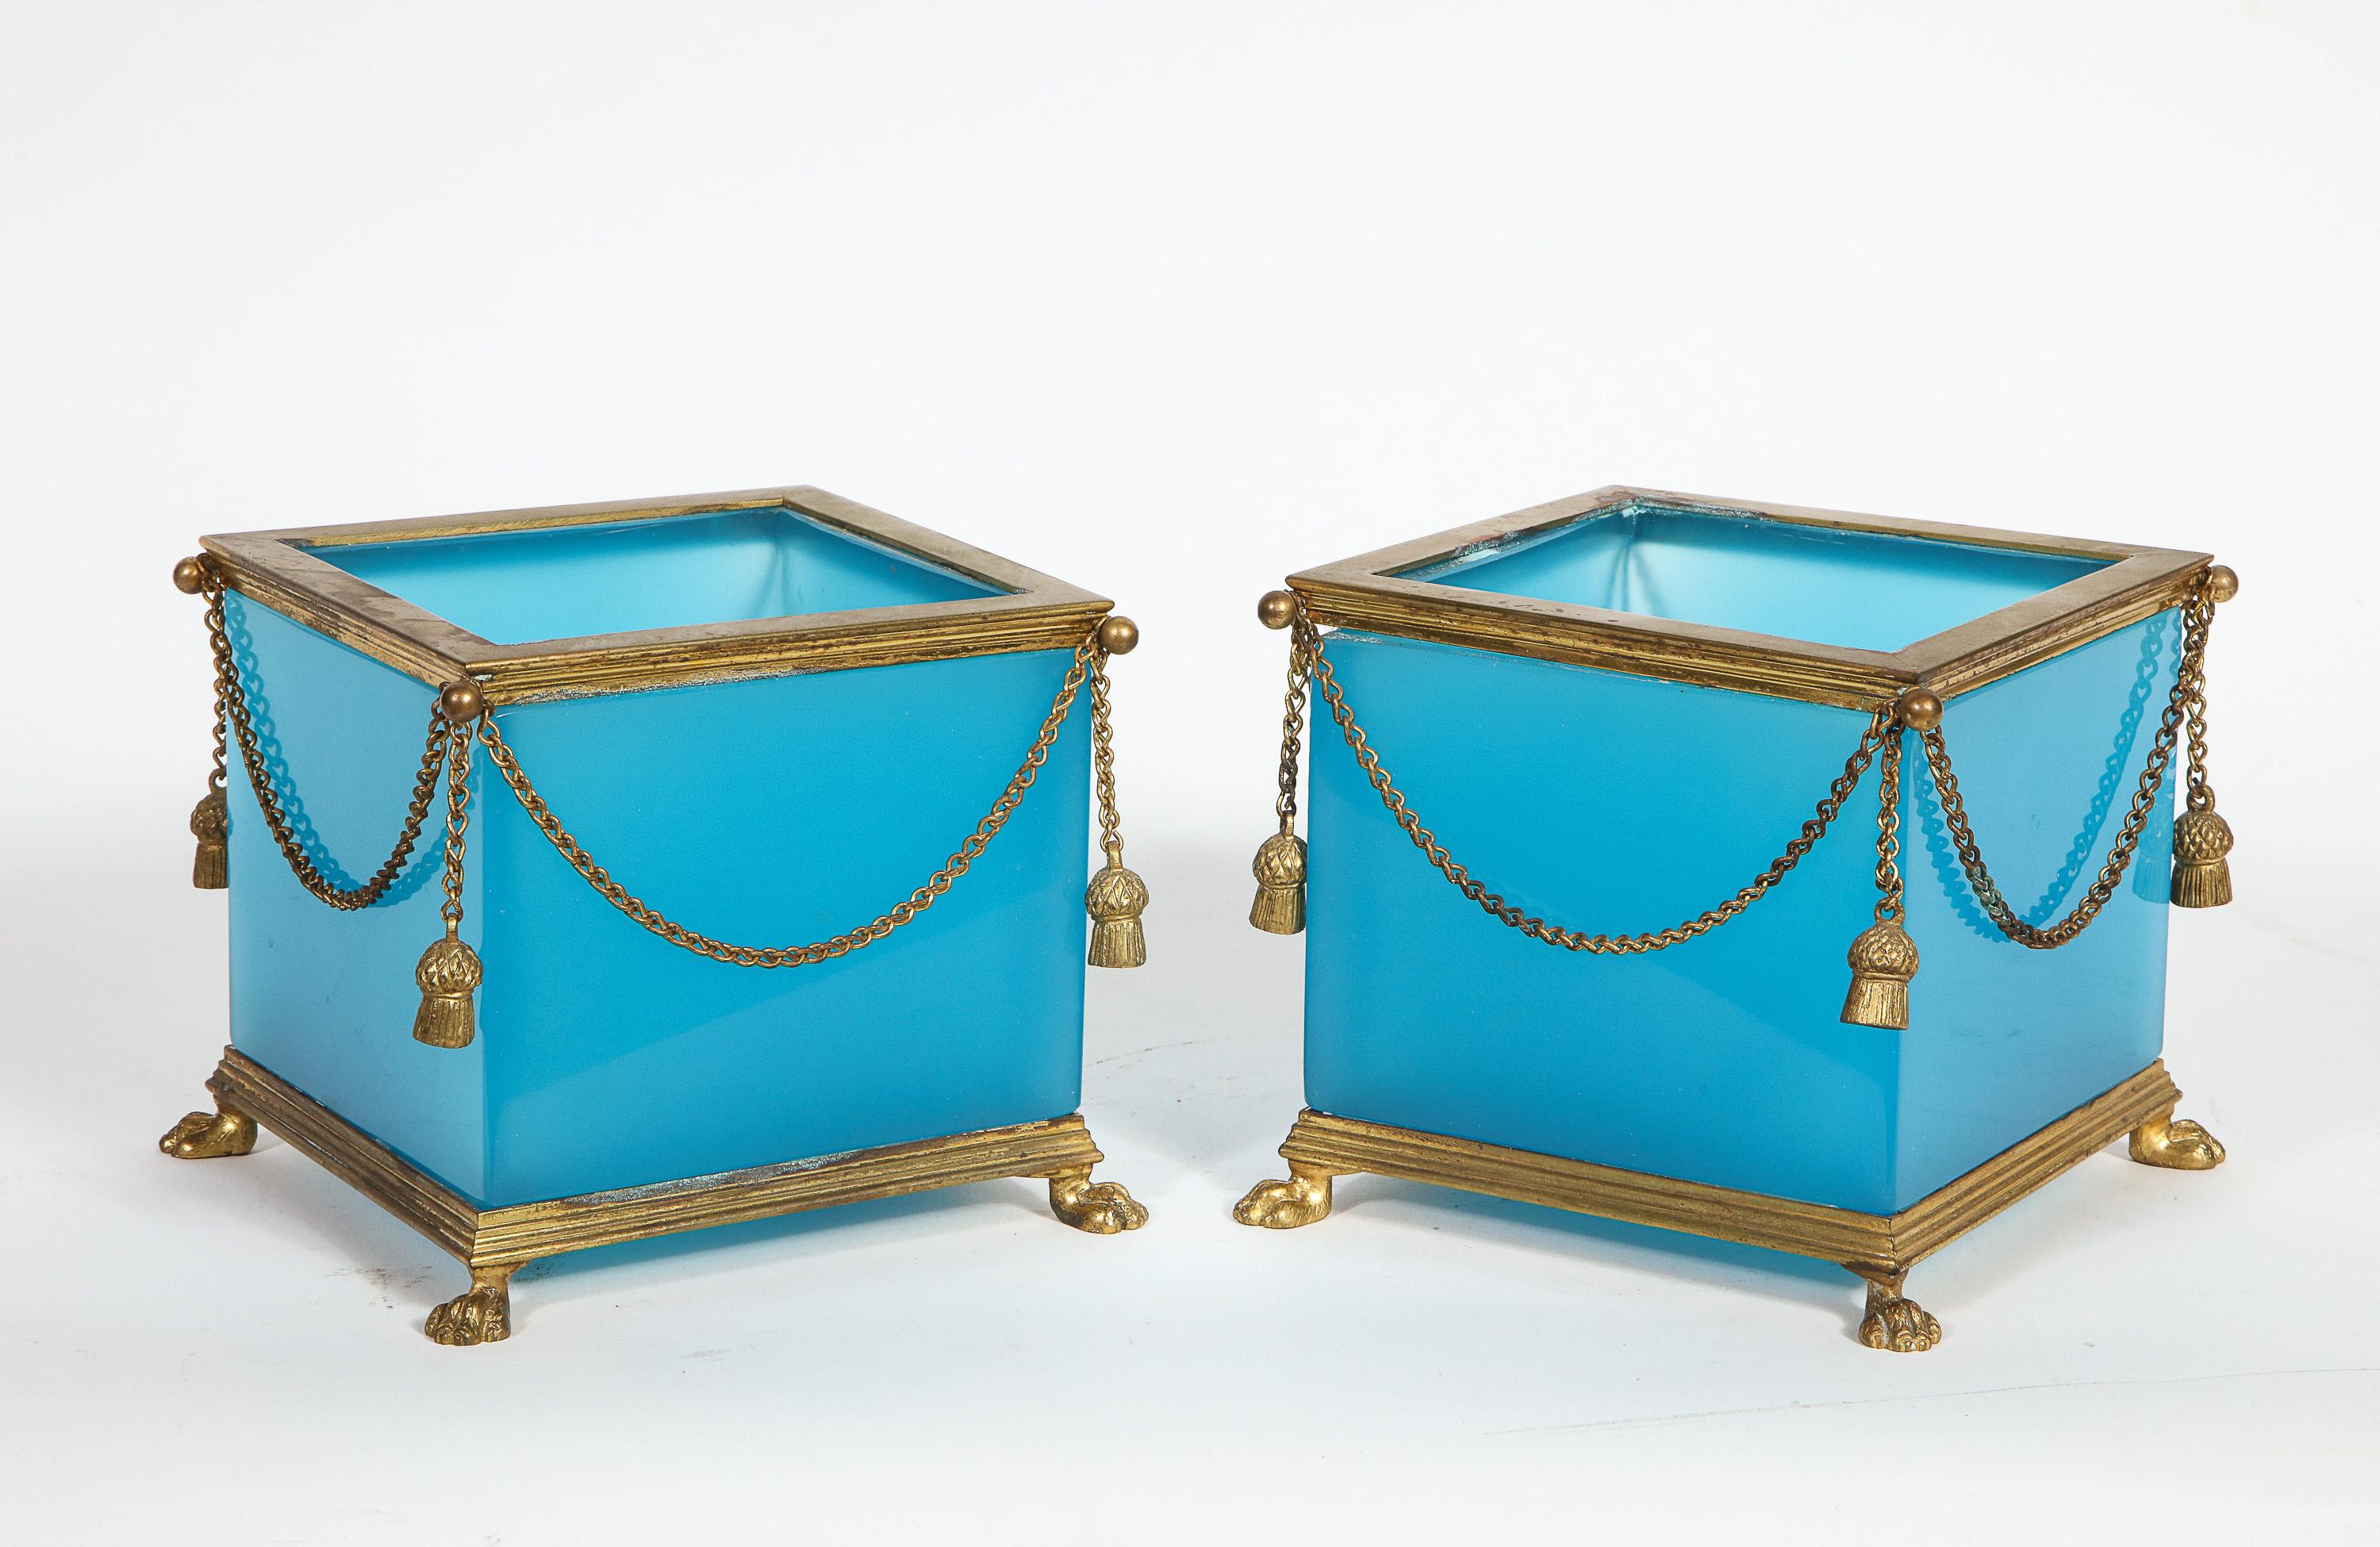 Napoleon III Exquisite Pair of French Ormolu Mounted Turquoise Blue Opaline Glass Jardinières